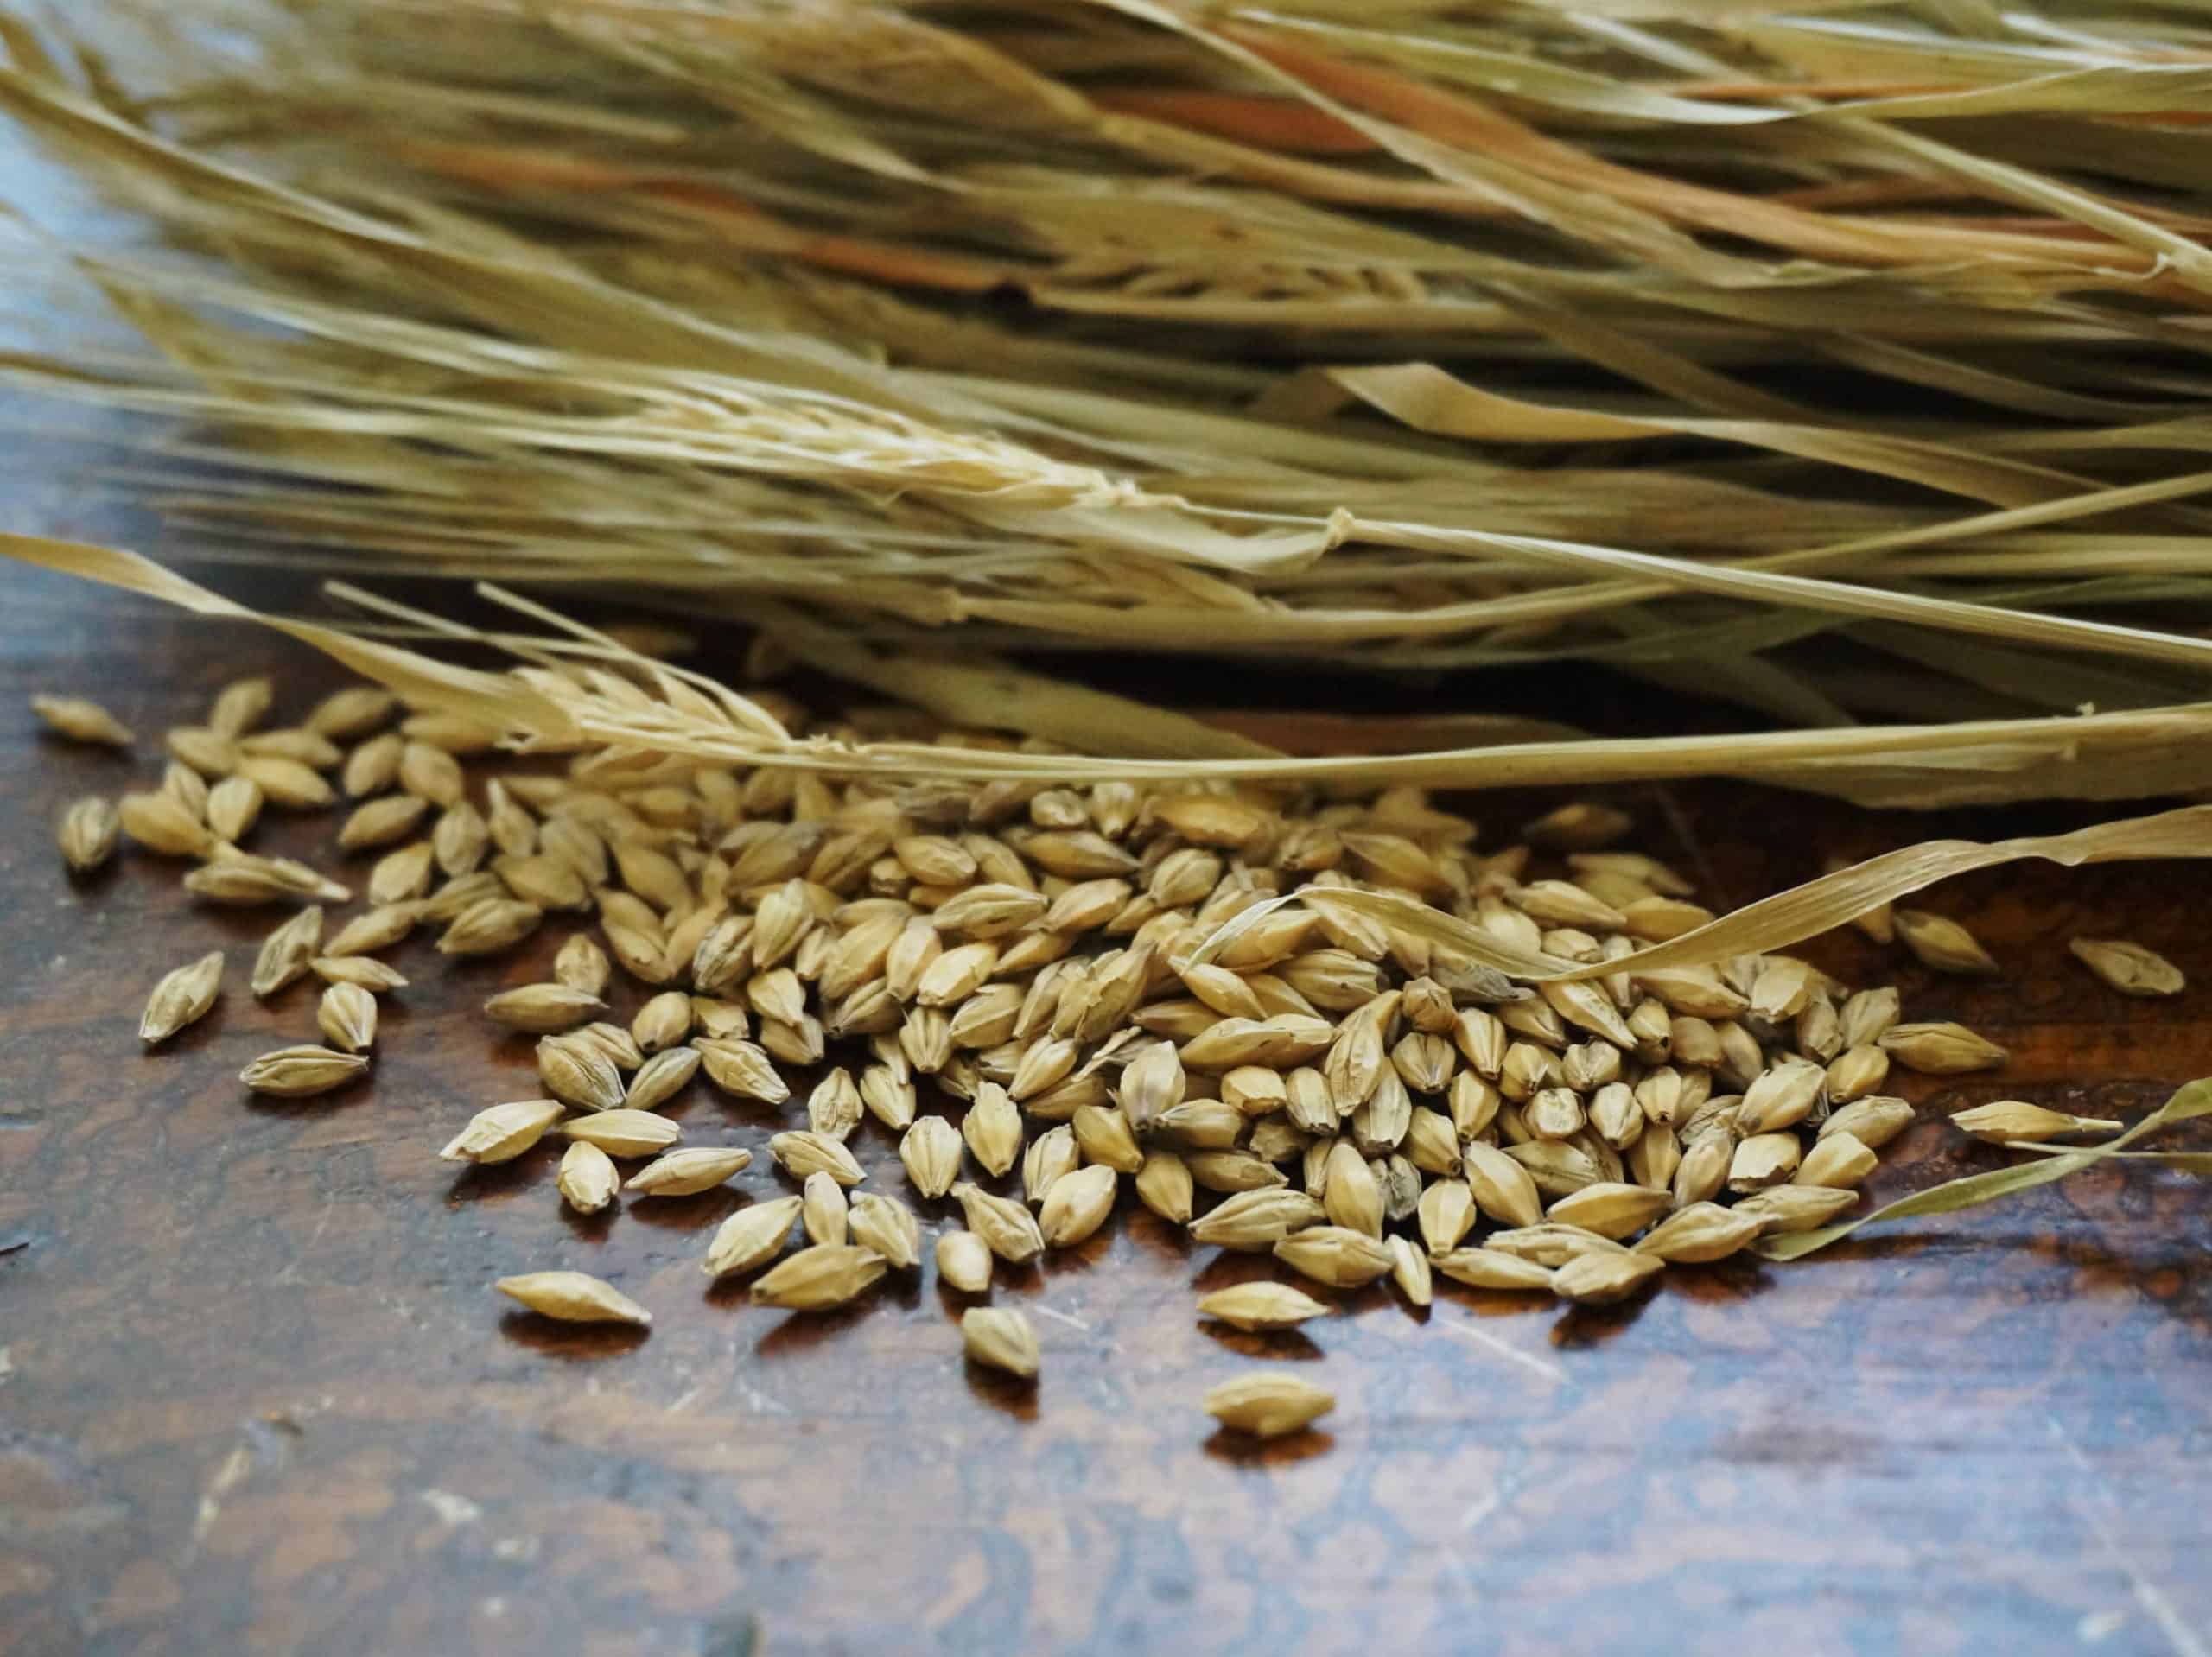 ©2021 Shelley S. Cramm Dried barley stalks pose with a handful of seeds for next year's crop